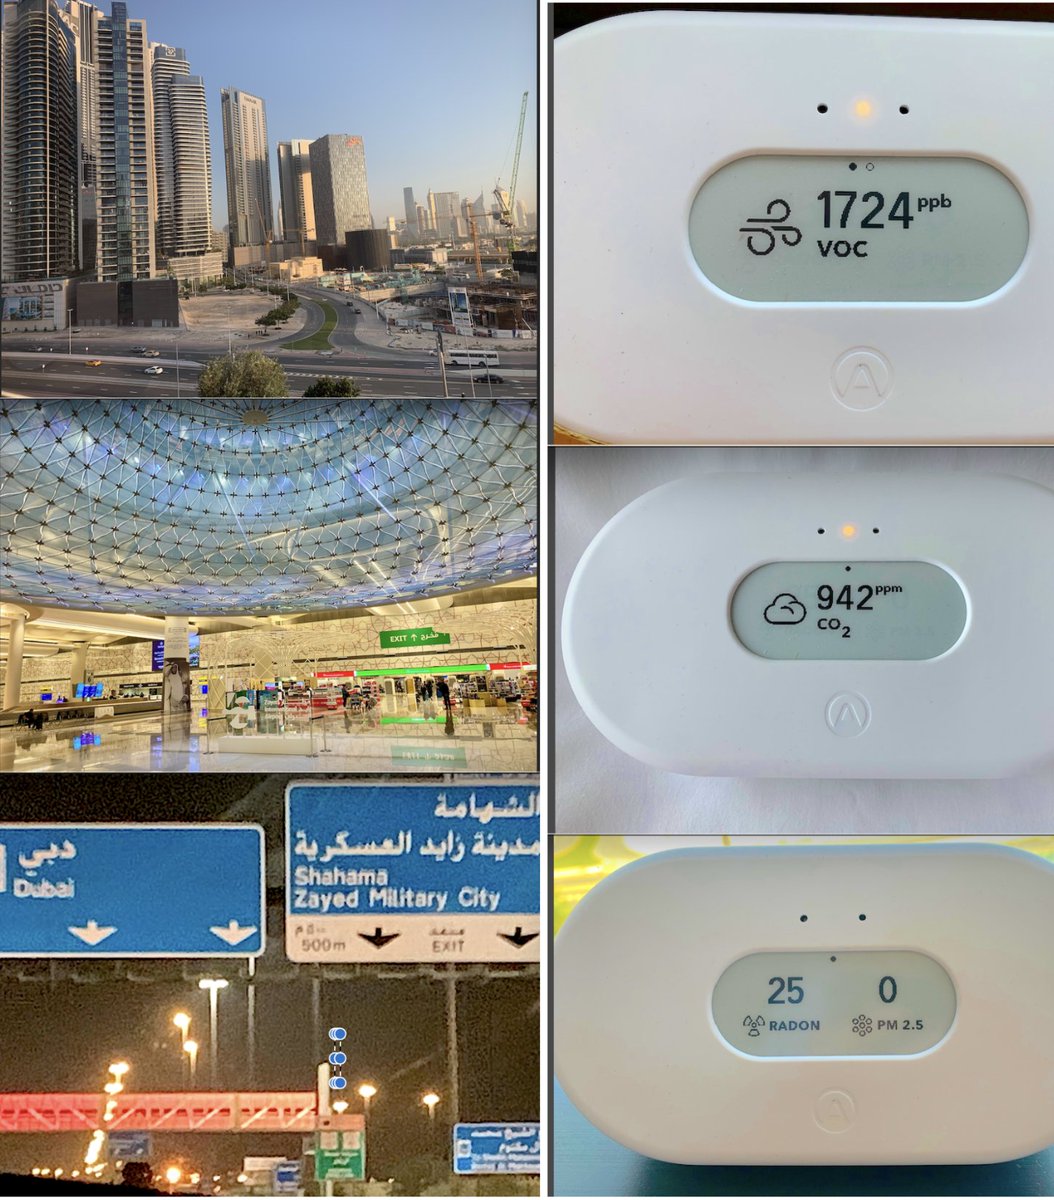 Some notes from traveling with the little air quality meter: 💡CO2 levels and 'volatile organic compound' (VOC) levels can be very high in hotels - many don't let you open the window (ironically to allow 'air conditioning' !!) 💡Particulate matter (e.g., PM2.5) can be high…